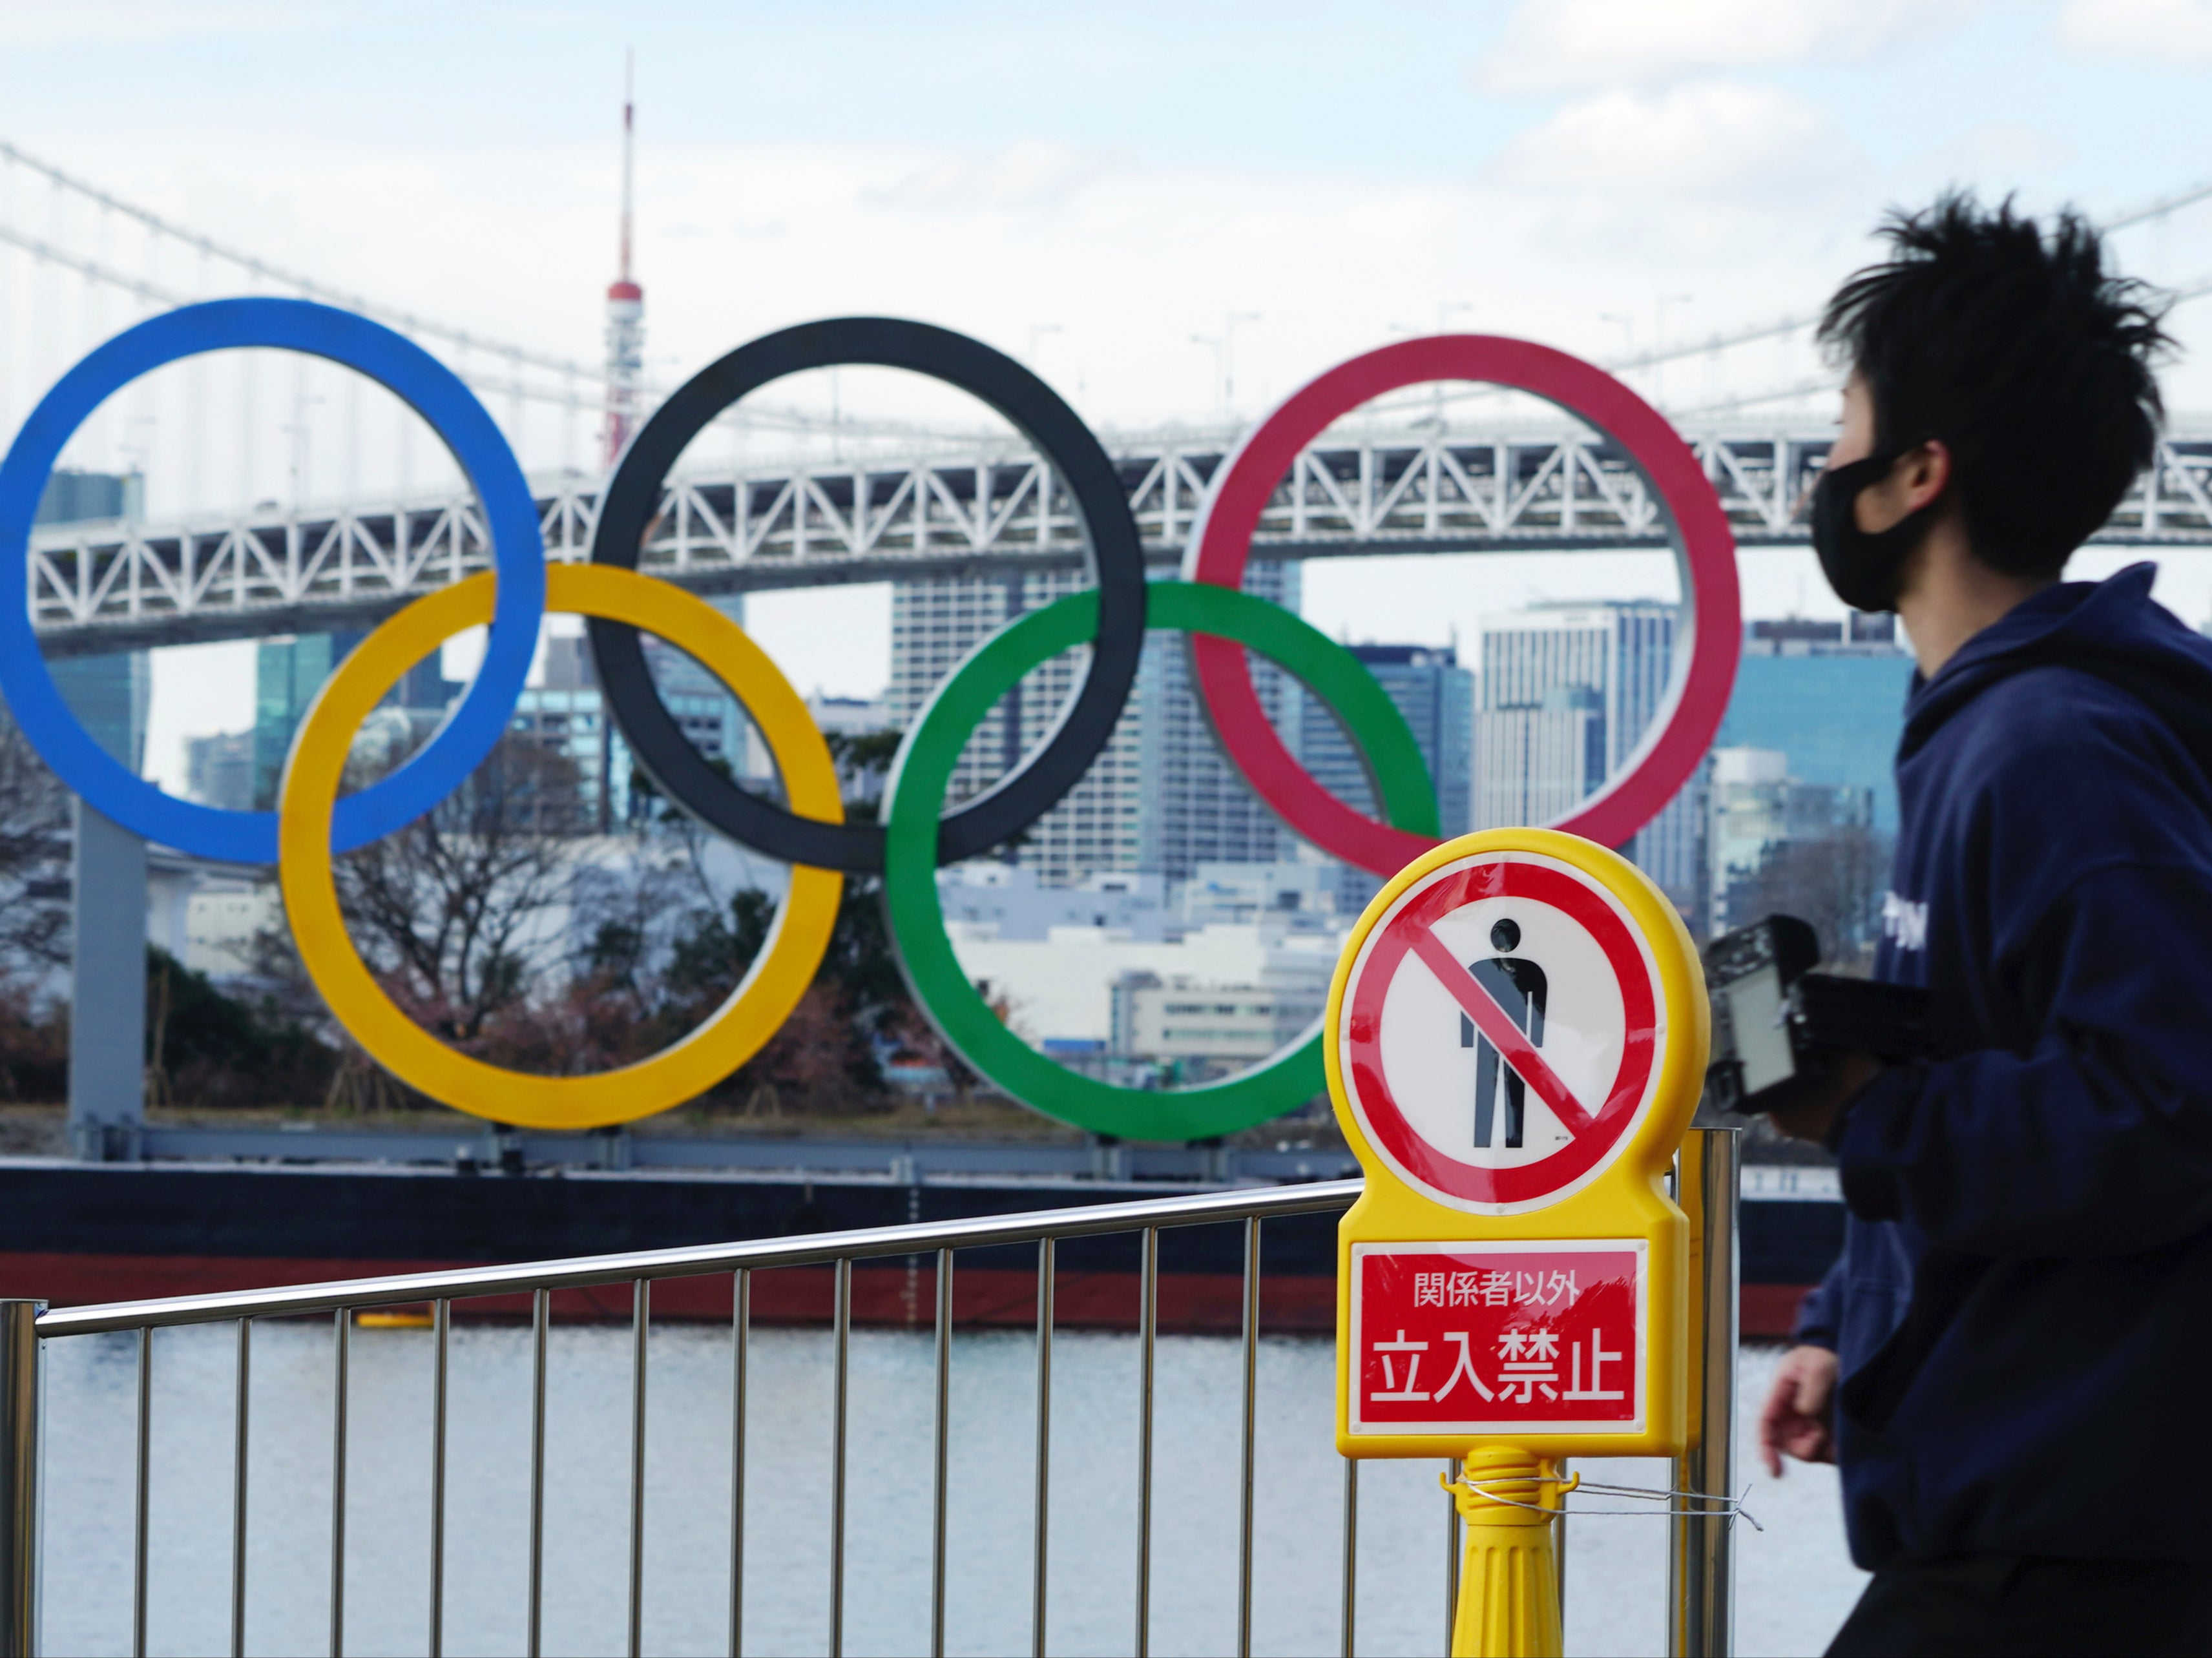 The Tokyo Games are in serious doubt given the coronavirus pandemic